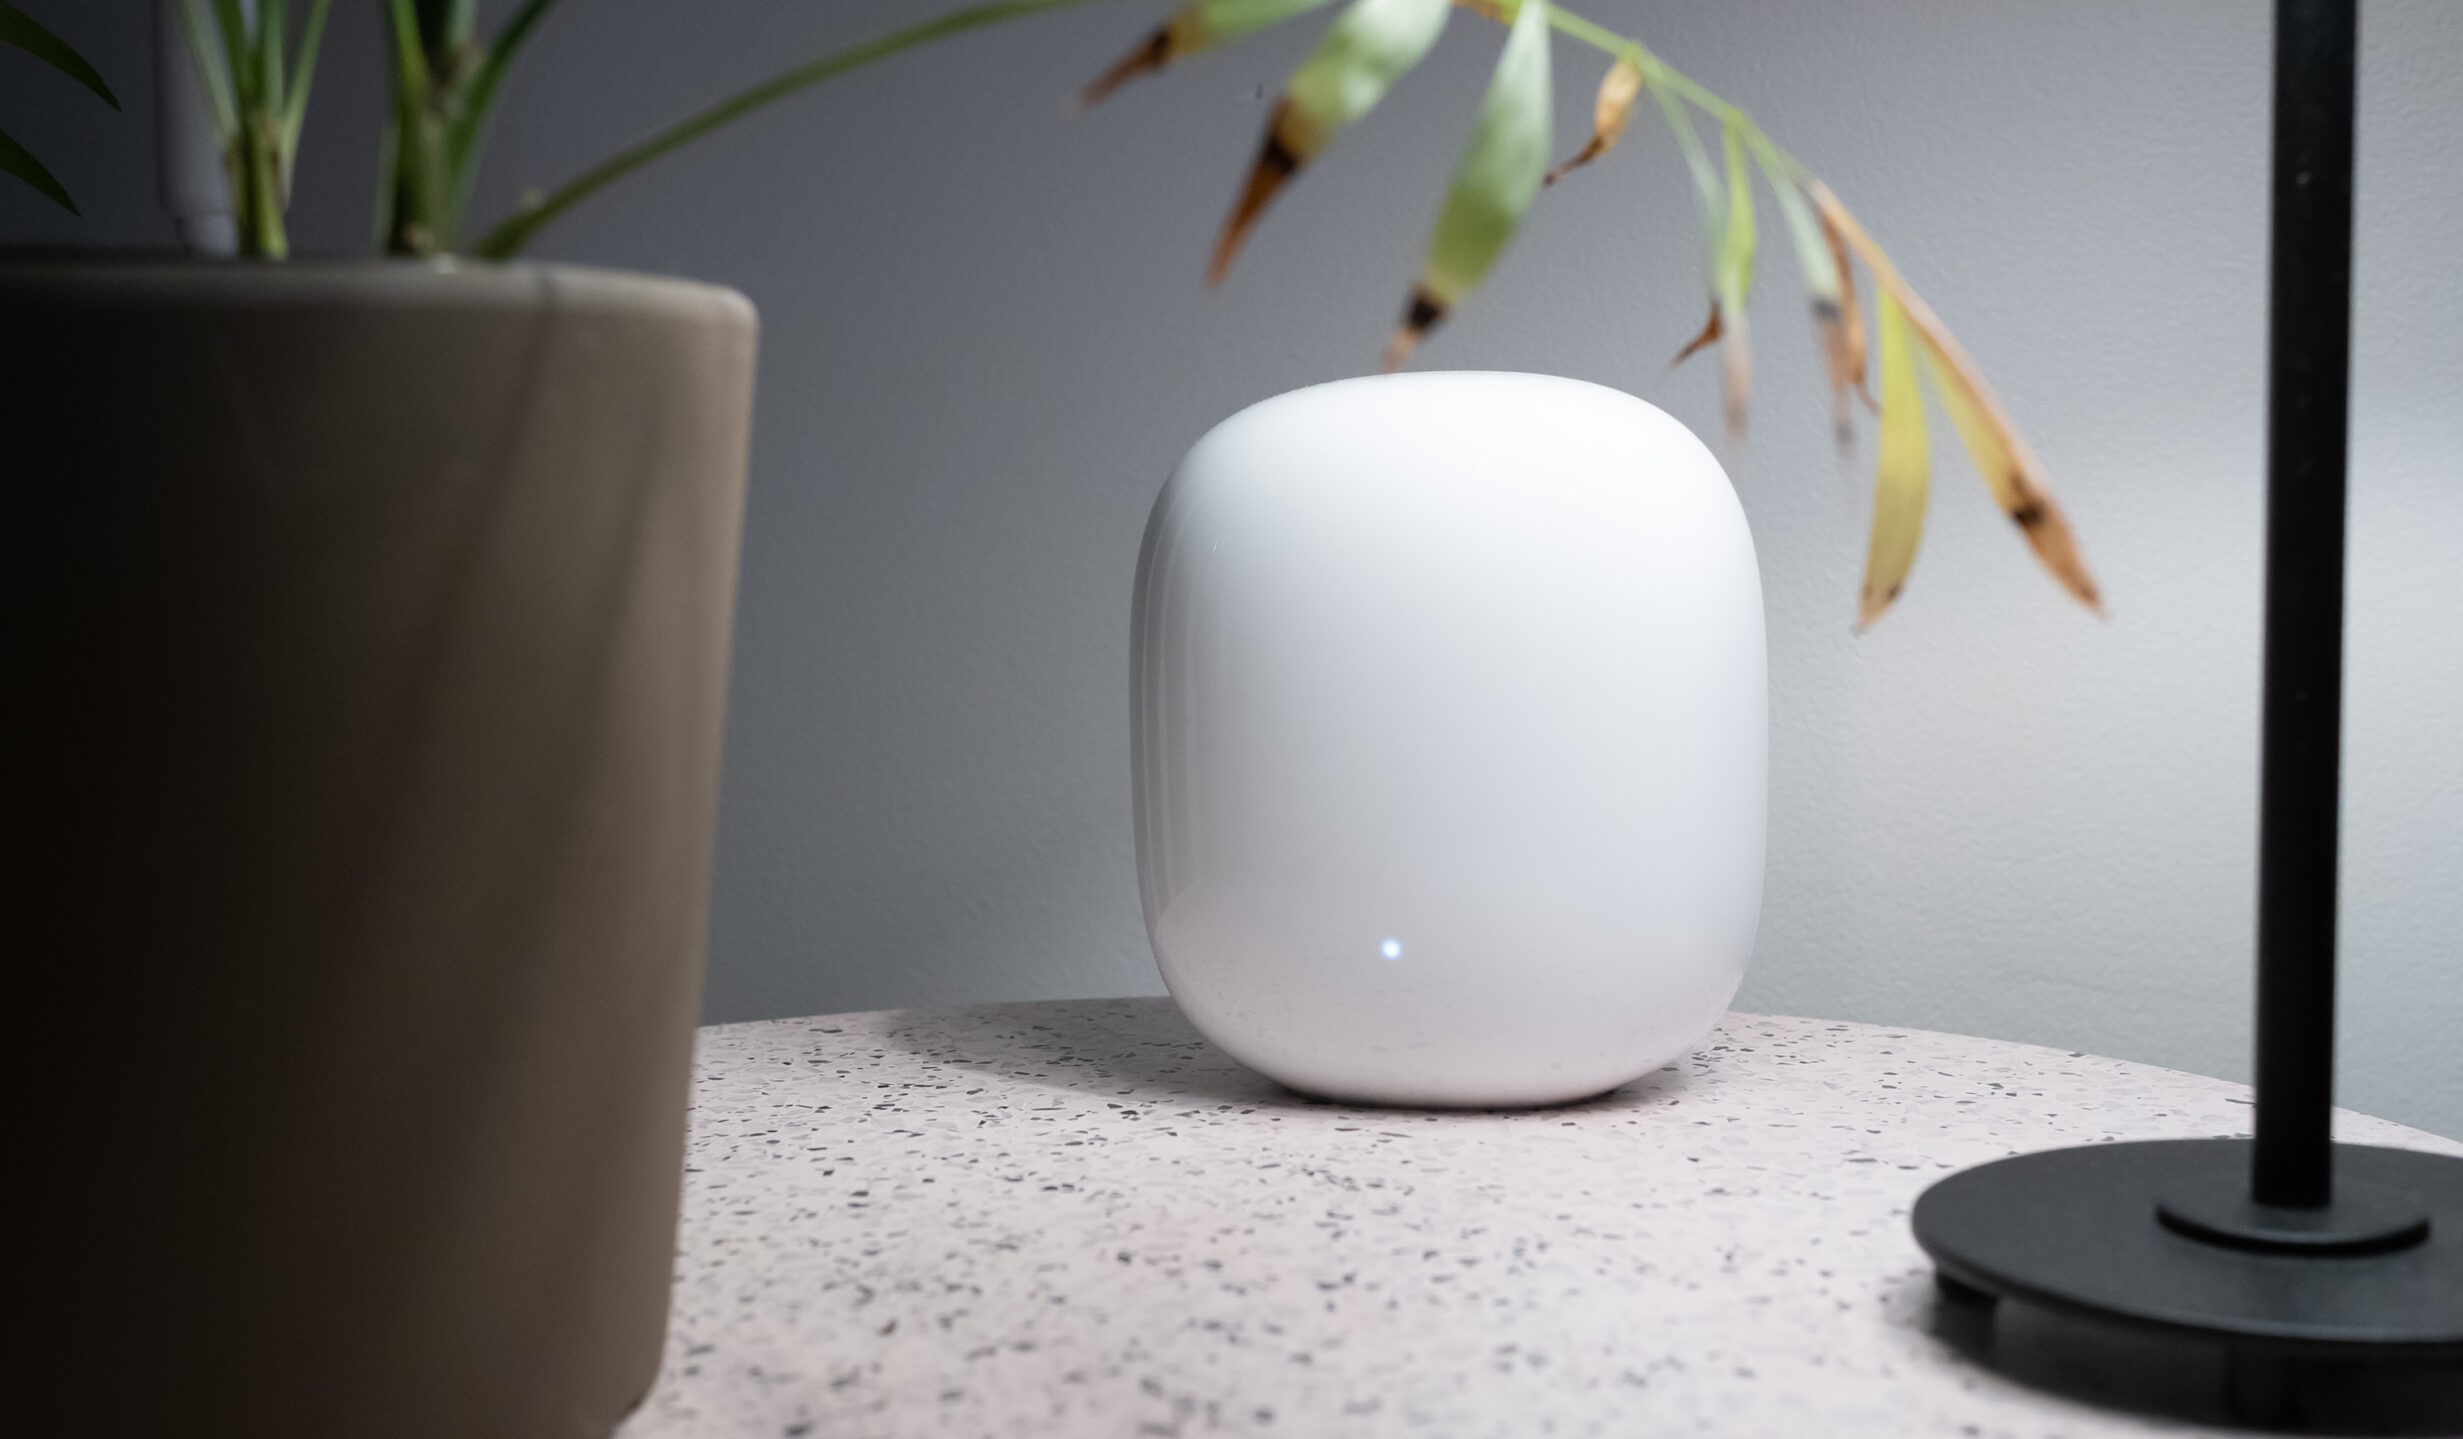 How To Set Up Google Nest Wi-Fi Router